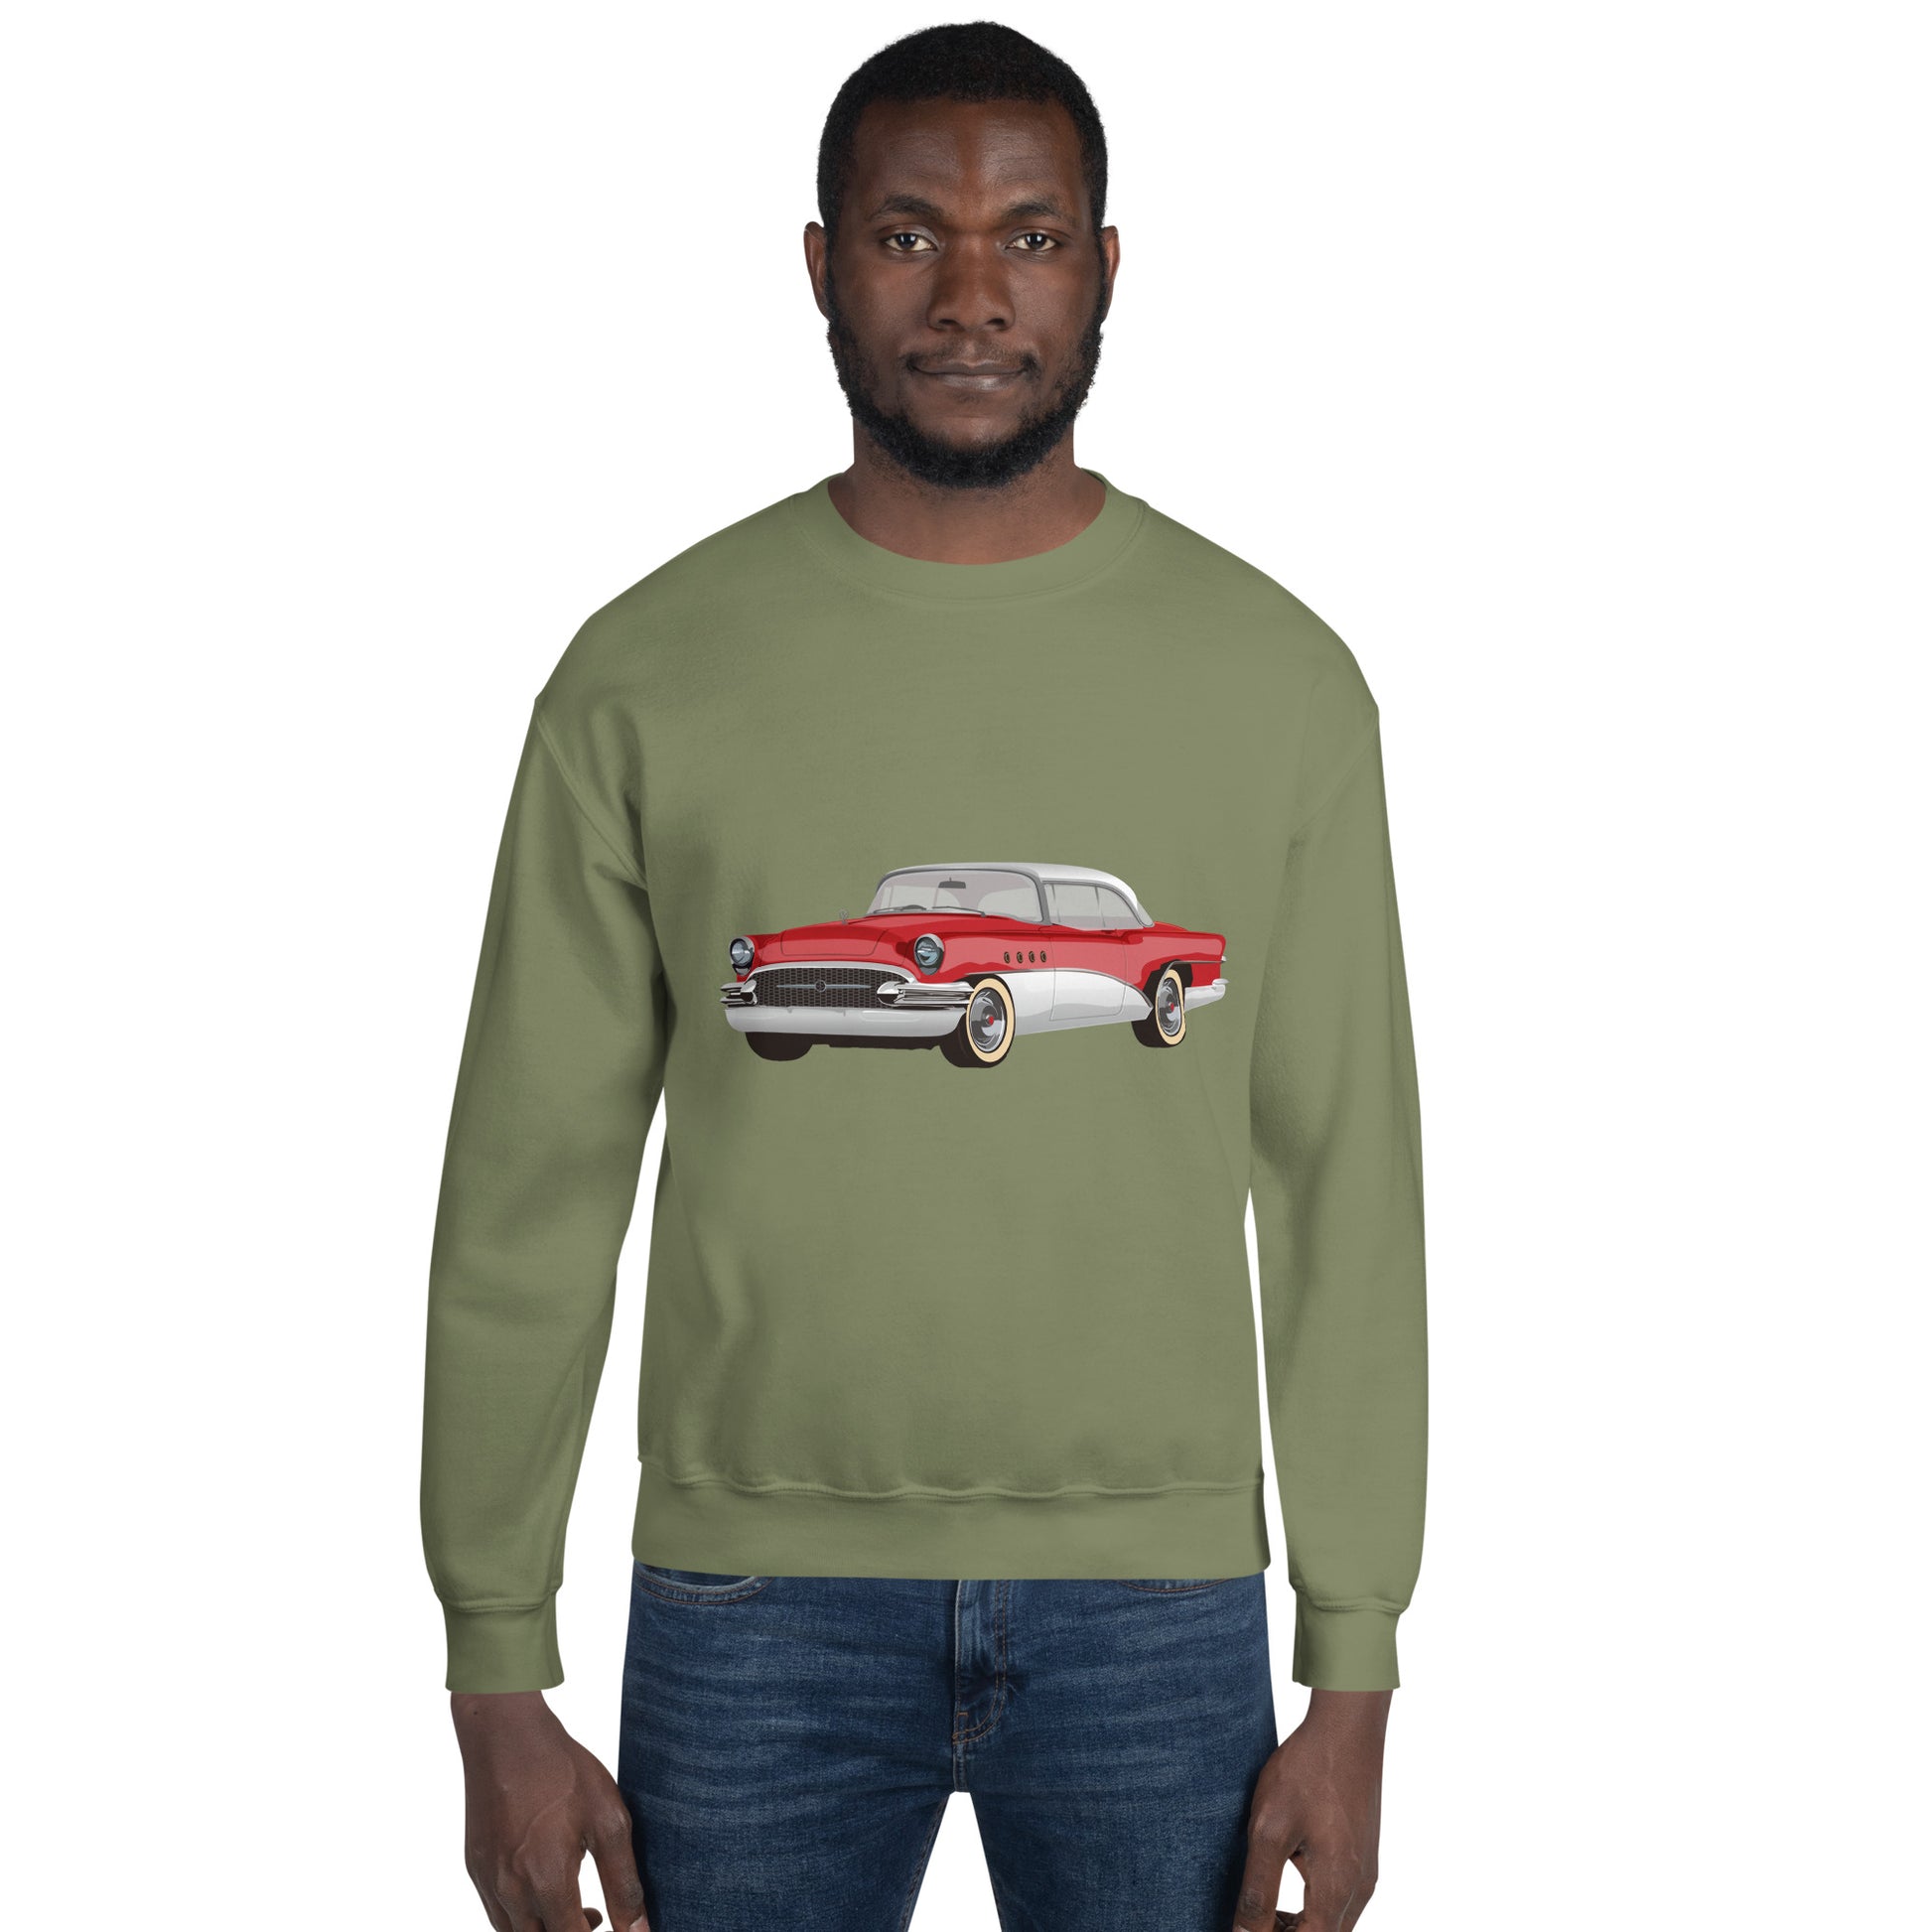 Man with military green sweatshirt with red chevrolet